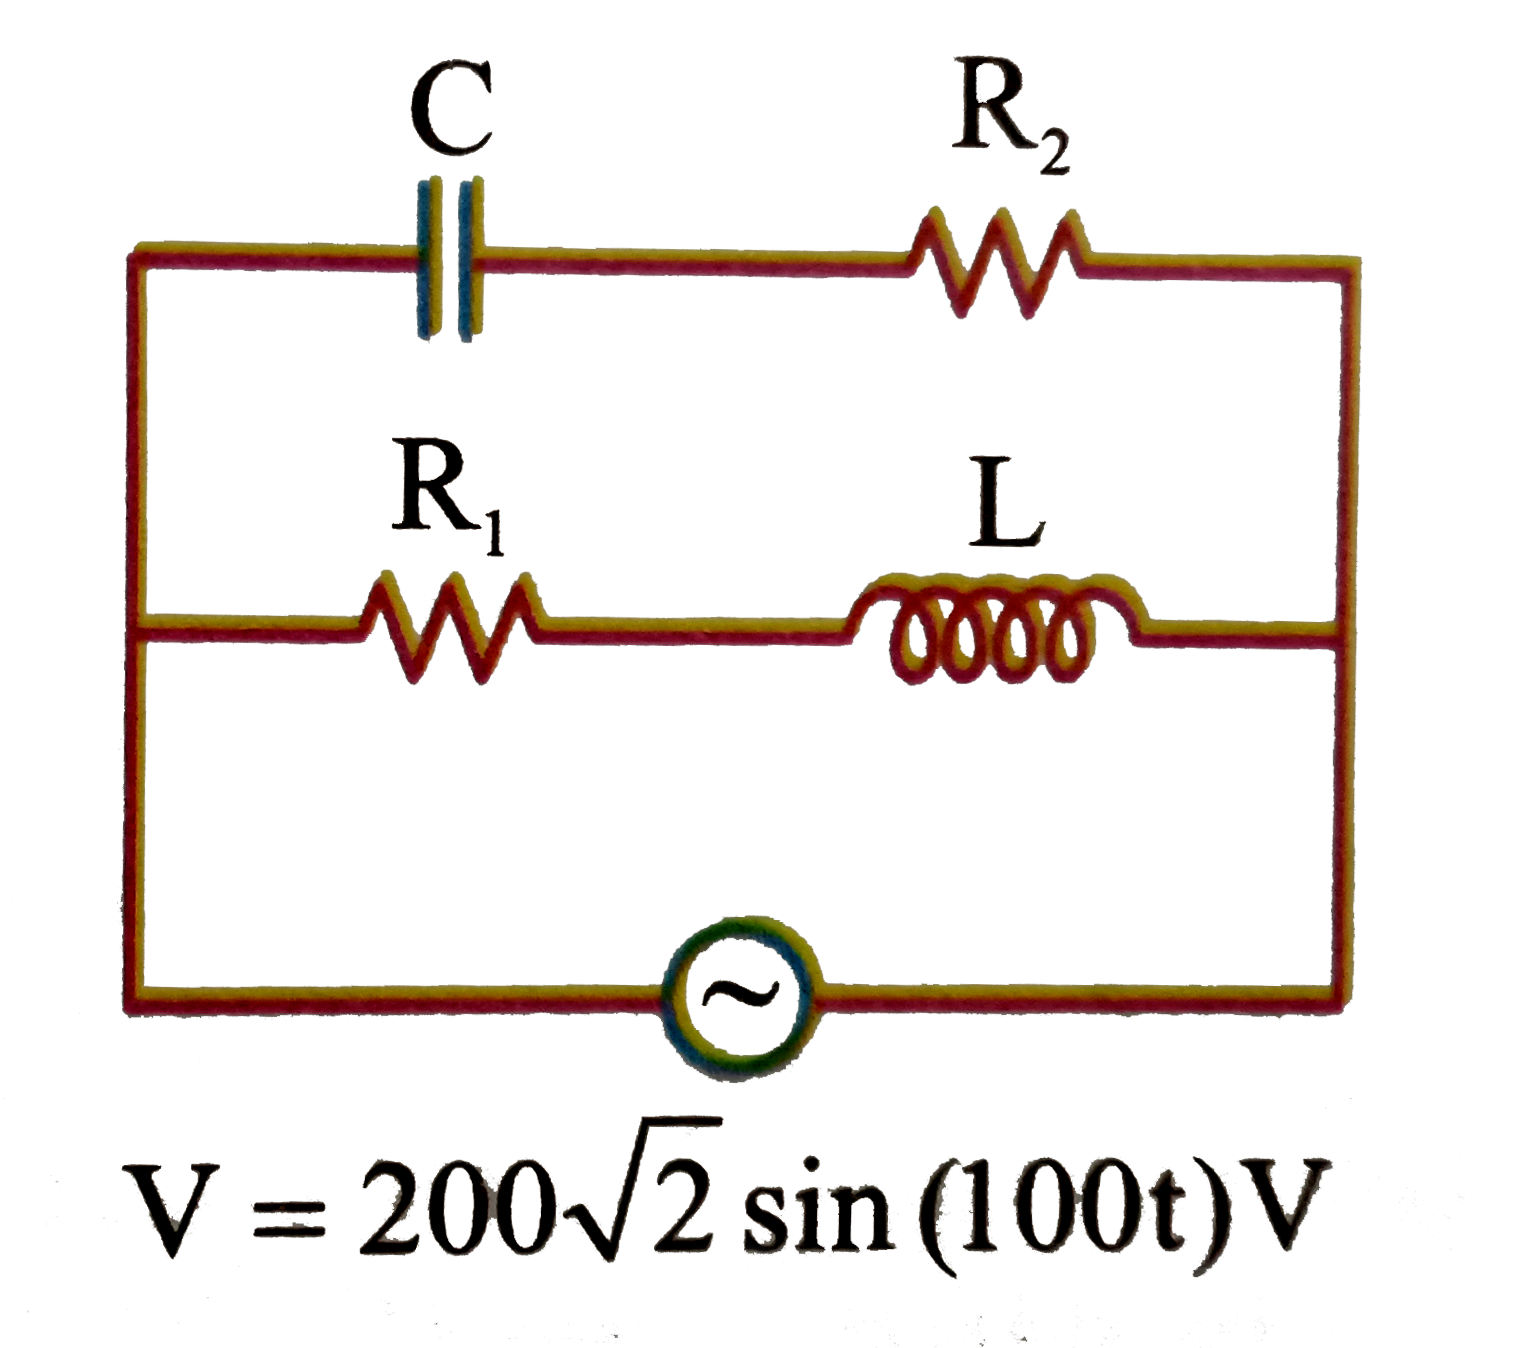 In the circuit shown in figure :   R = 10 Omega , L = (sqrt(3))/(10) H, R(2) = 20 Omega and C = (sqrt(3))/(2) mF. Current in L - R(1) circuit is I(1) in C - R(1) circuit is I(2) and the main current is I      At some instant current in L - R(1) circuit is 10 A. At the same instant current in C - R(2) branch will be